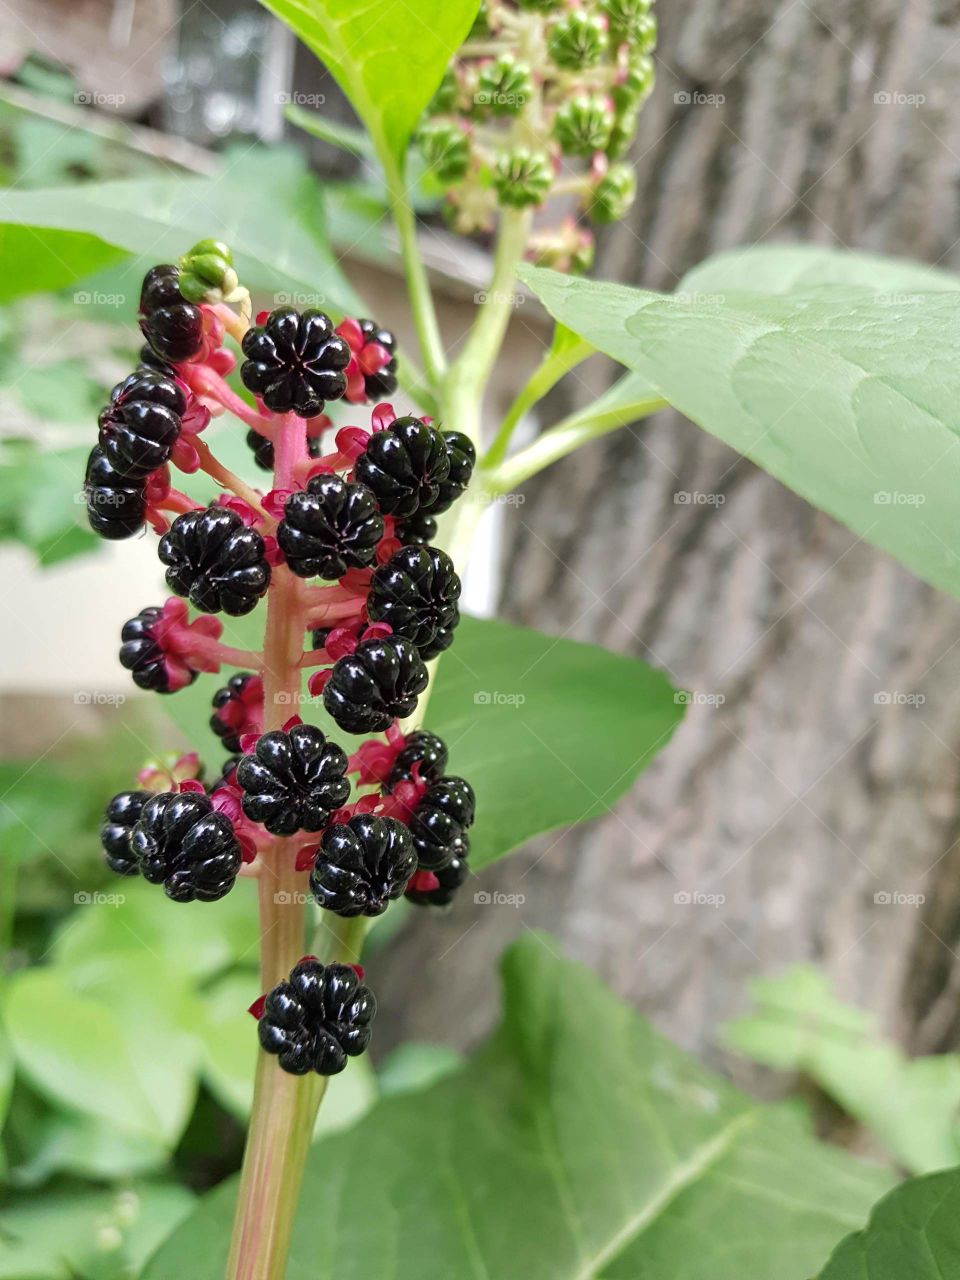 Ripe berries of a wild plant